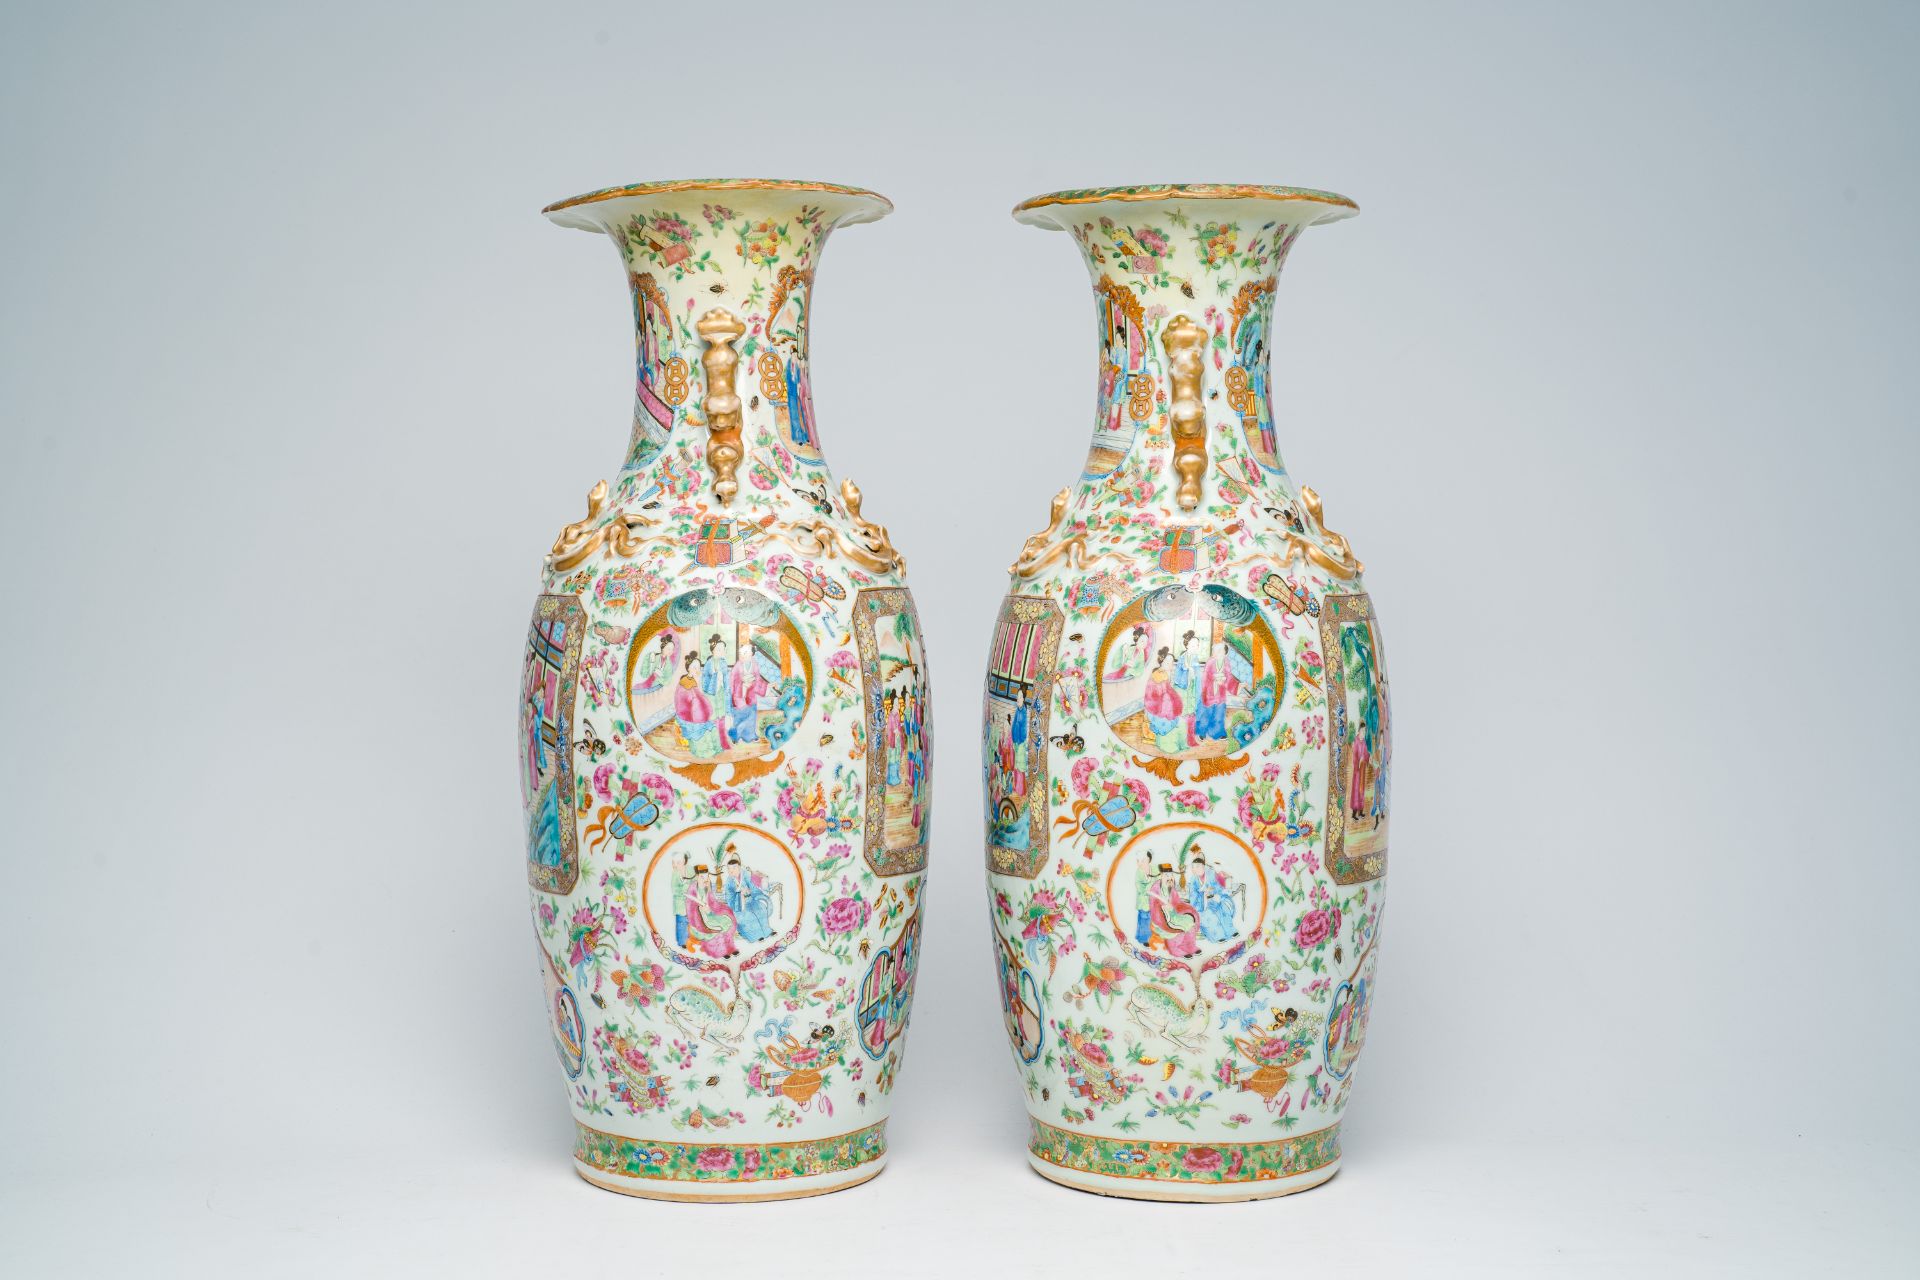 A pair of Chinese Canton famille rose vases with palace scenes and floral design, 19th C. - Image 2 of 7